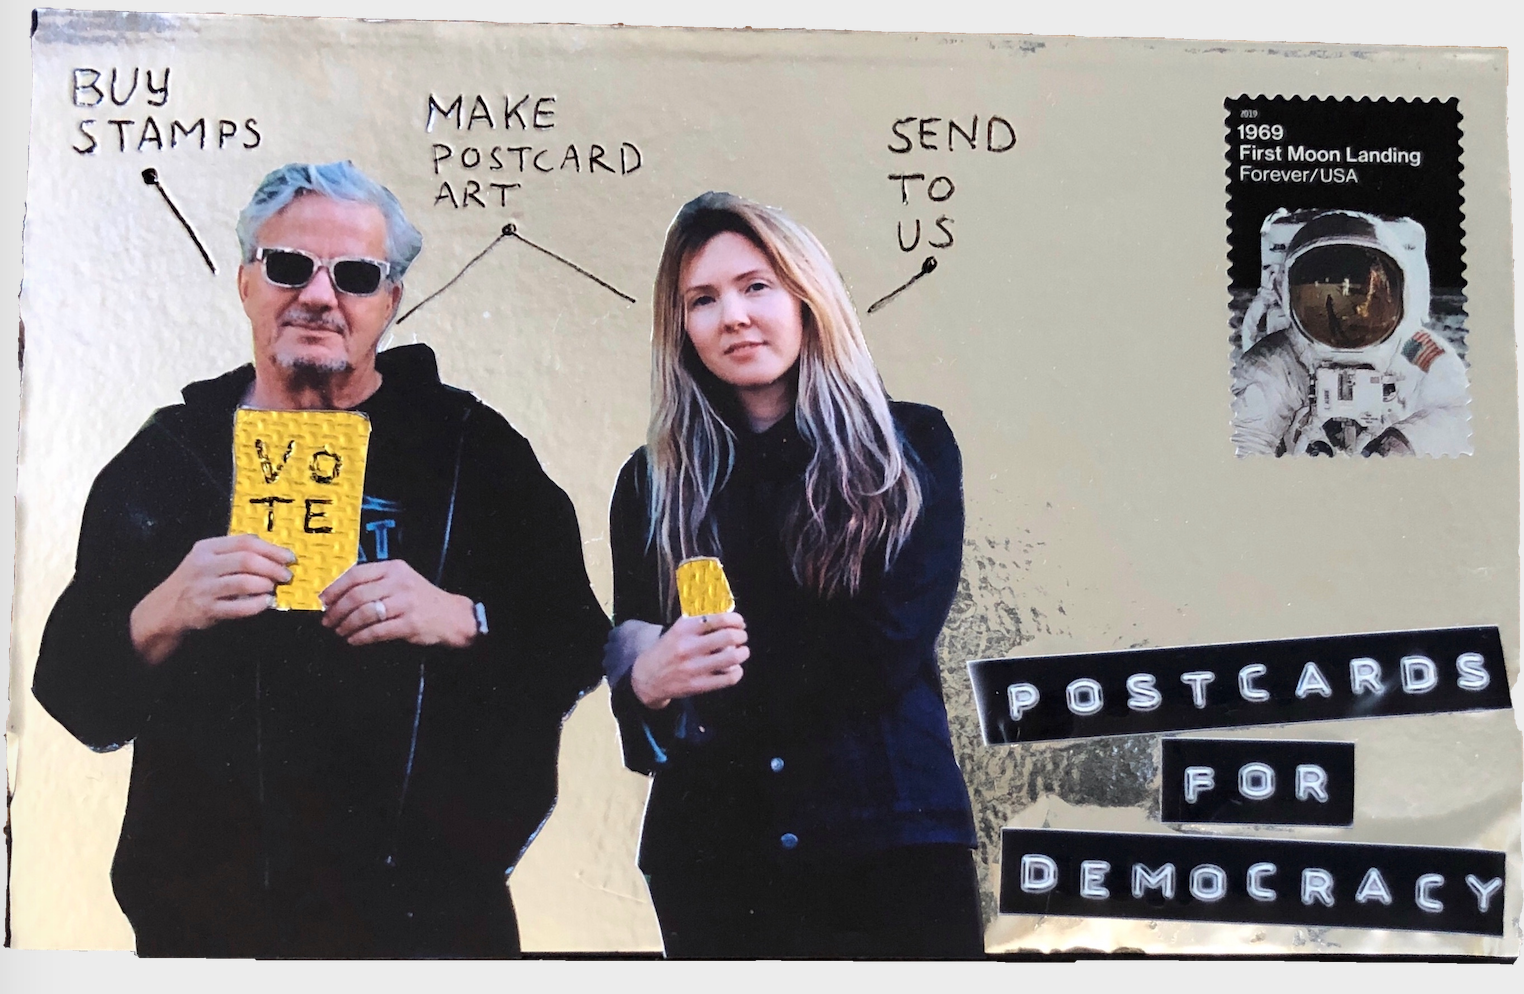 The artists pose on a postcard that reads buy stamps, make postcard art, send to us